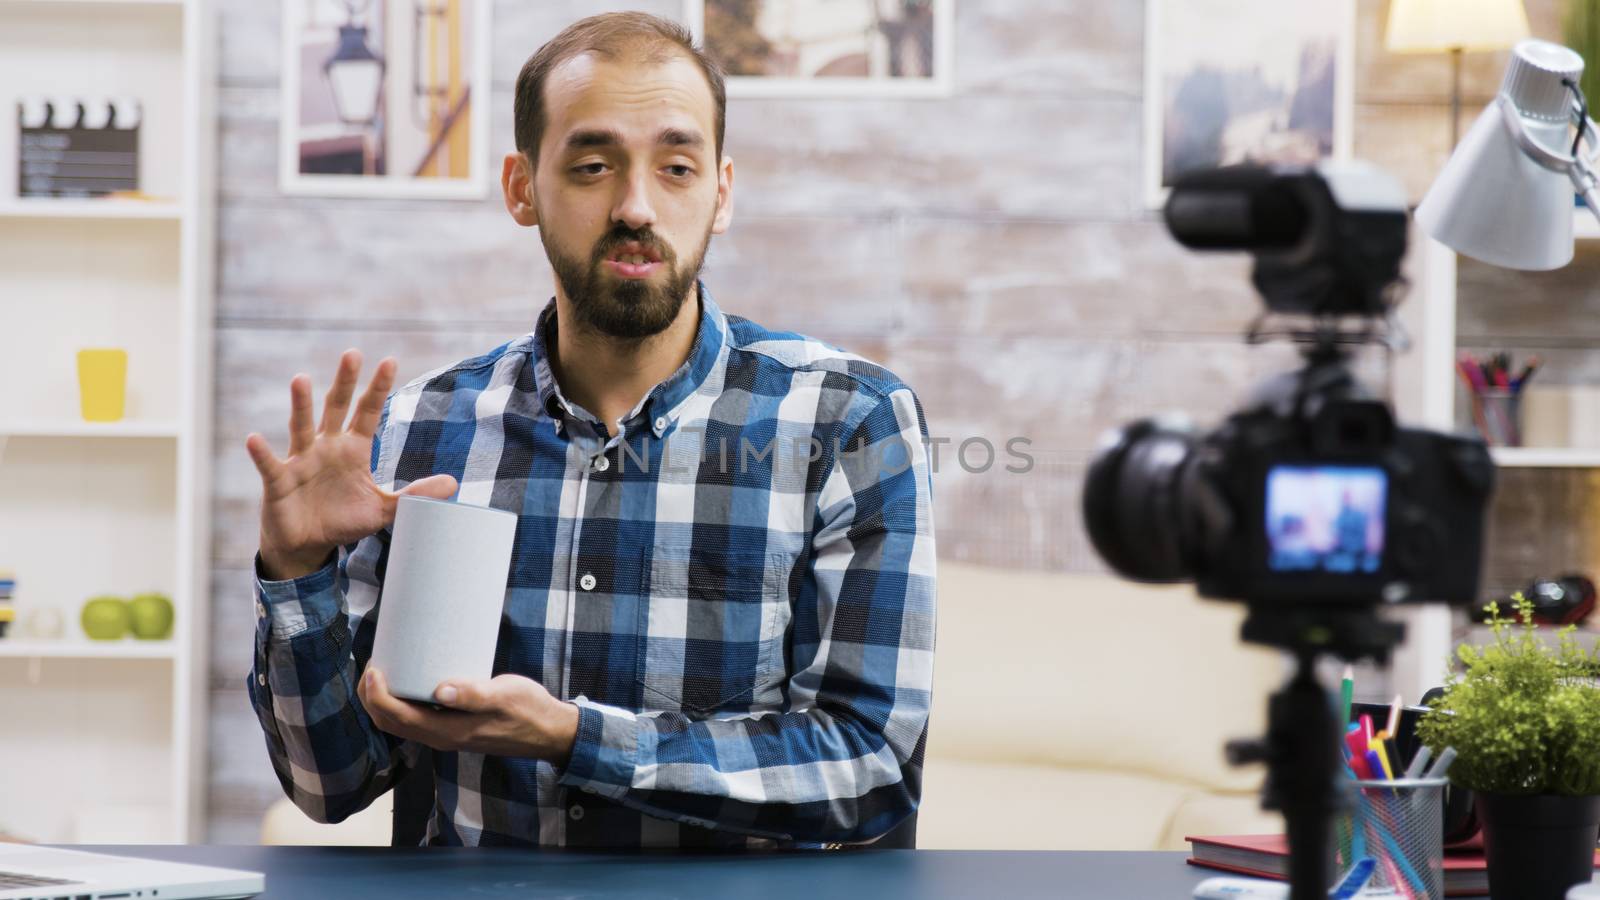 Famous vlogger filming smart speaker review for his followers. Influencer recording new vlog.